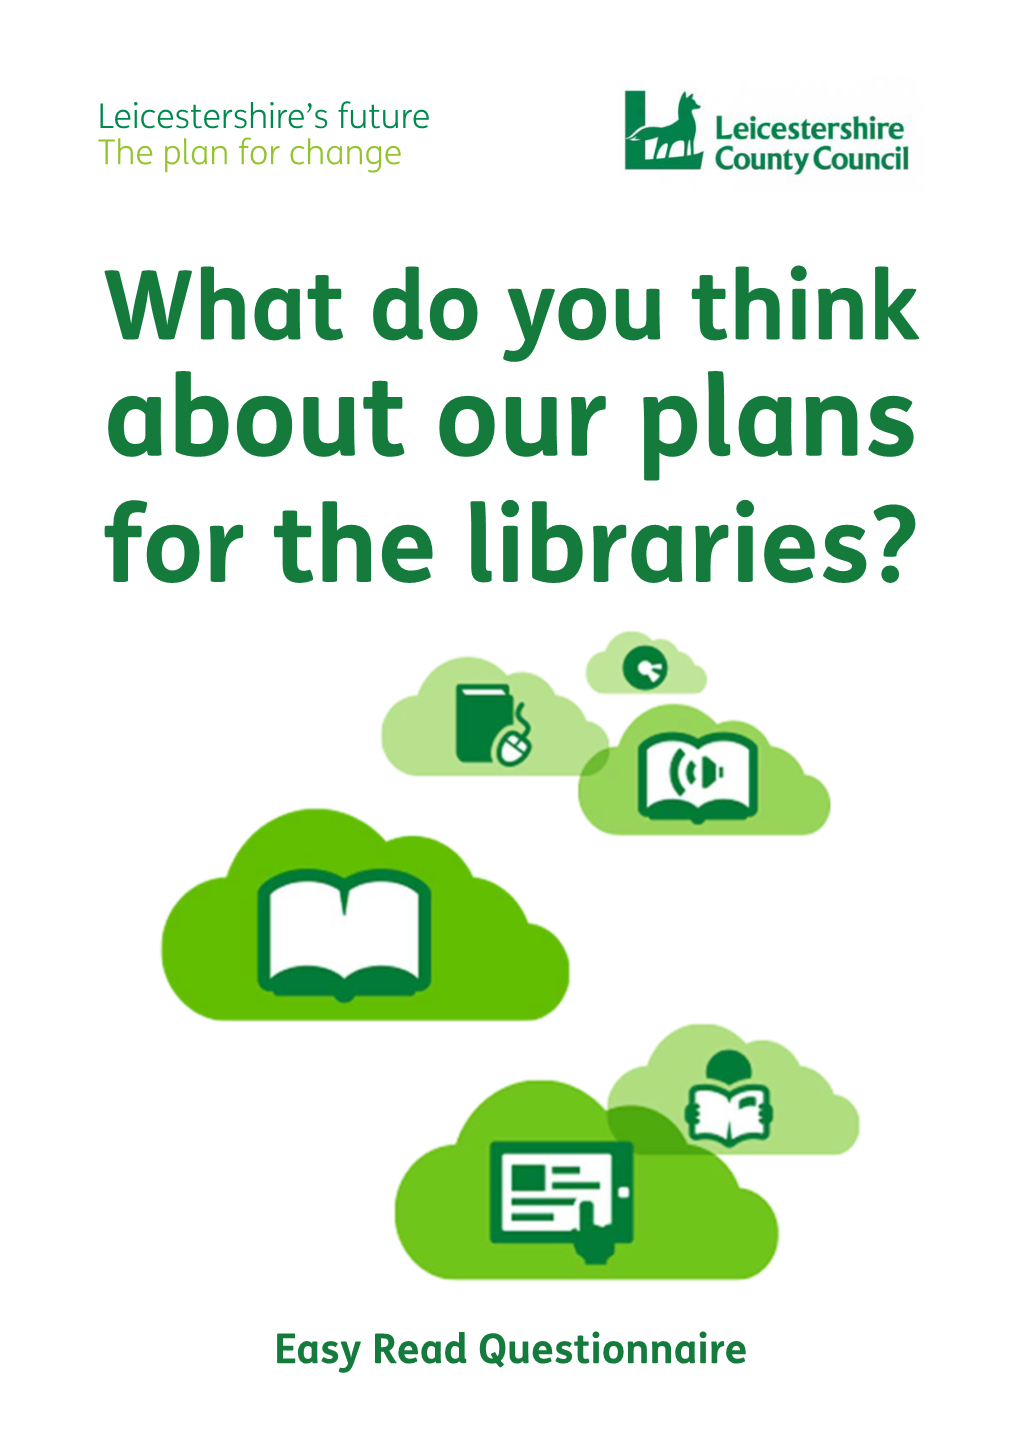 What Do You Think About Our Plans for the Libraries?